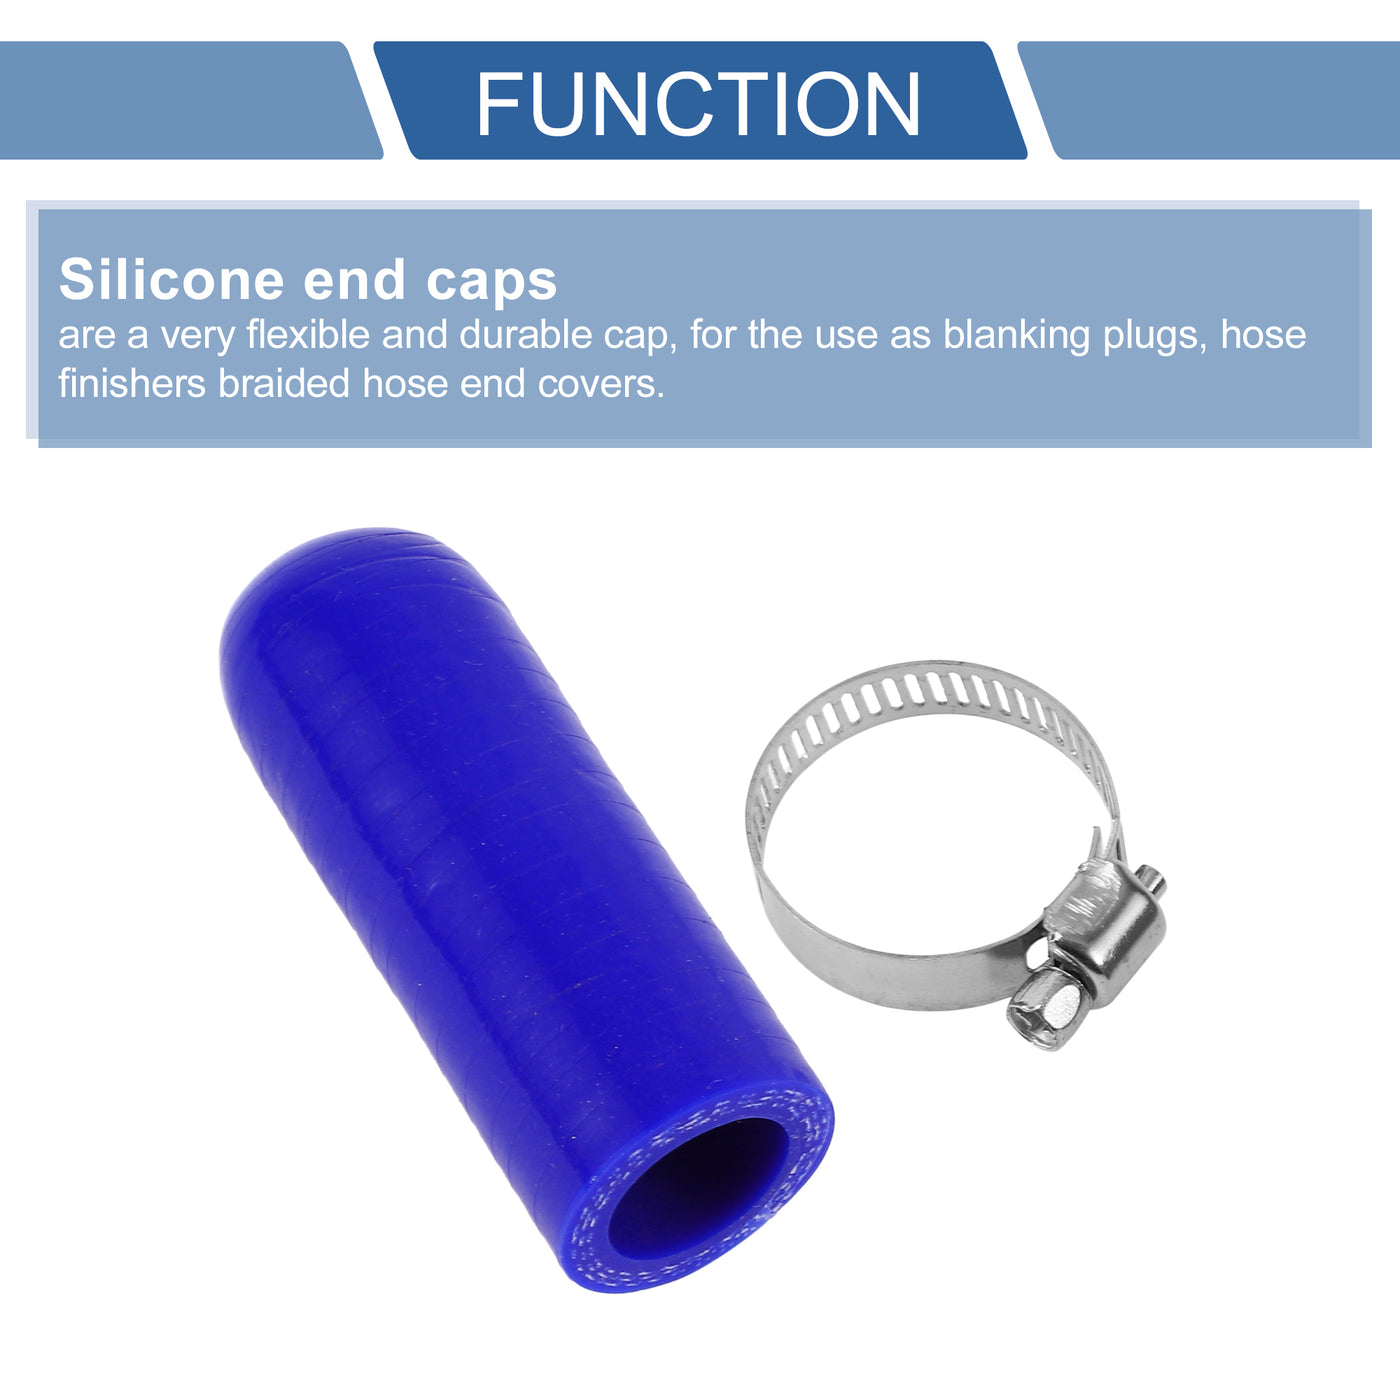 X AUTOHAUX 1 Pcs 60mm Length 18mm/0.71" ID Blue Car Silicone Rubber Hose End Cap with Clamp Silicone Reinforced Blanking Cap for Bypass Tube Universal